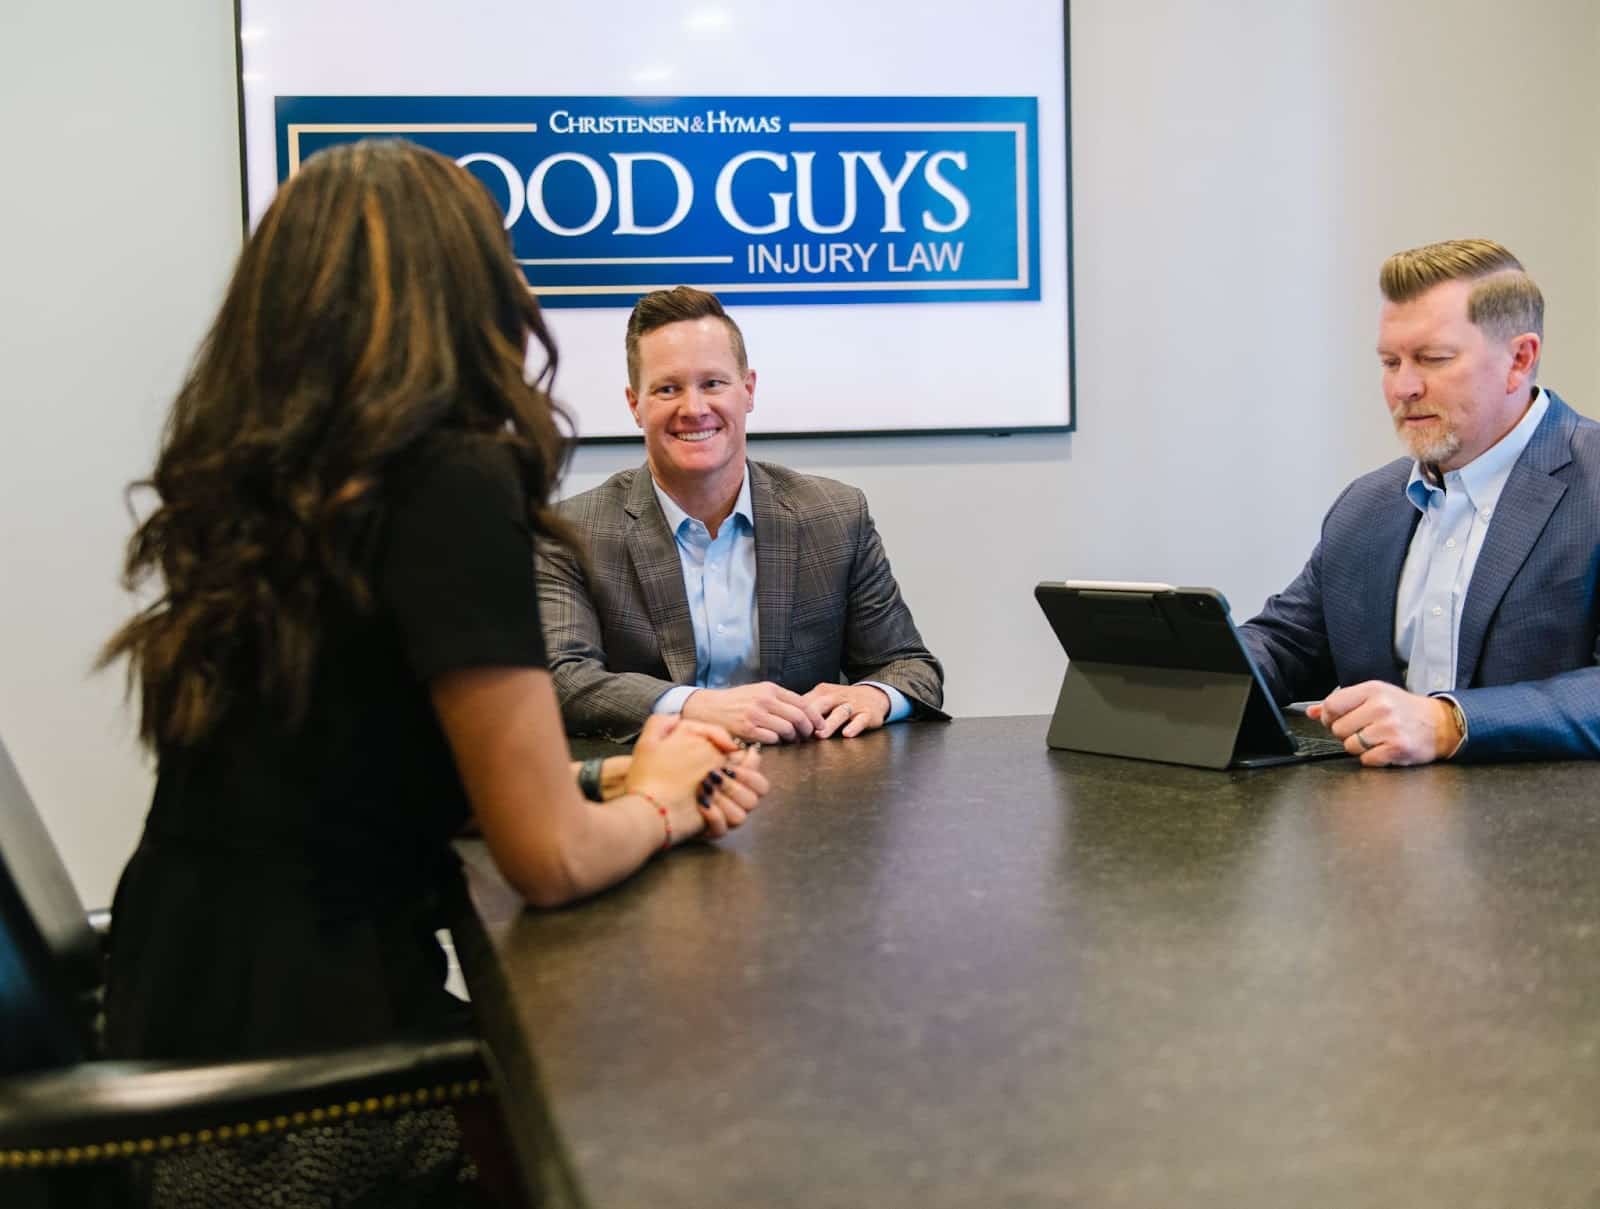 REACH OUT TO GOOD GUYS INJURY LAW FOR A FREE CASE EVALUATION WITH OUR UTAH DRUNK DRIVING ACCIDENT ATTORNEY